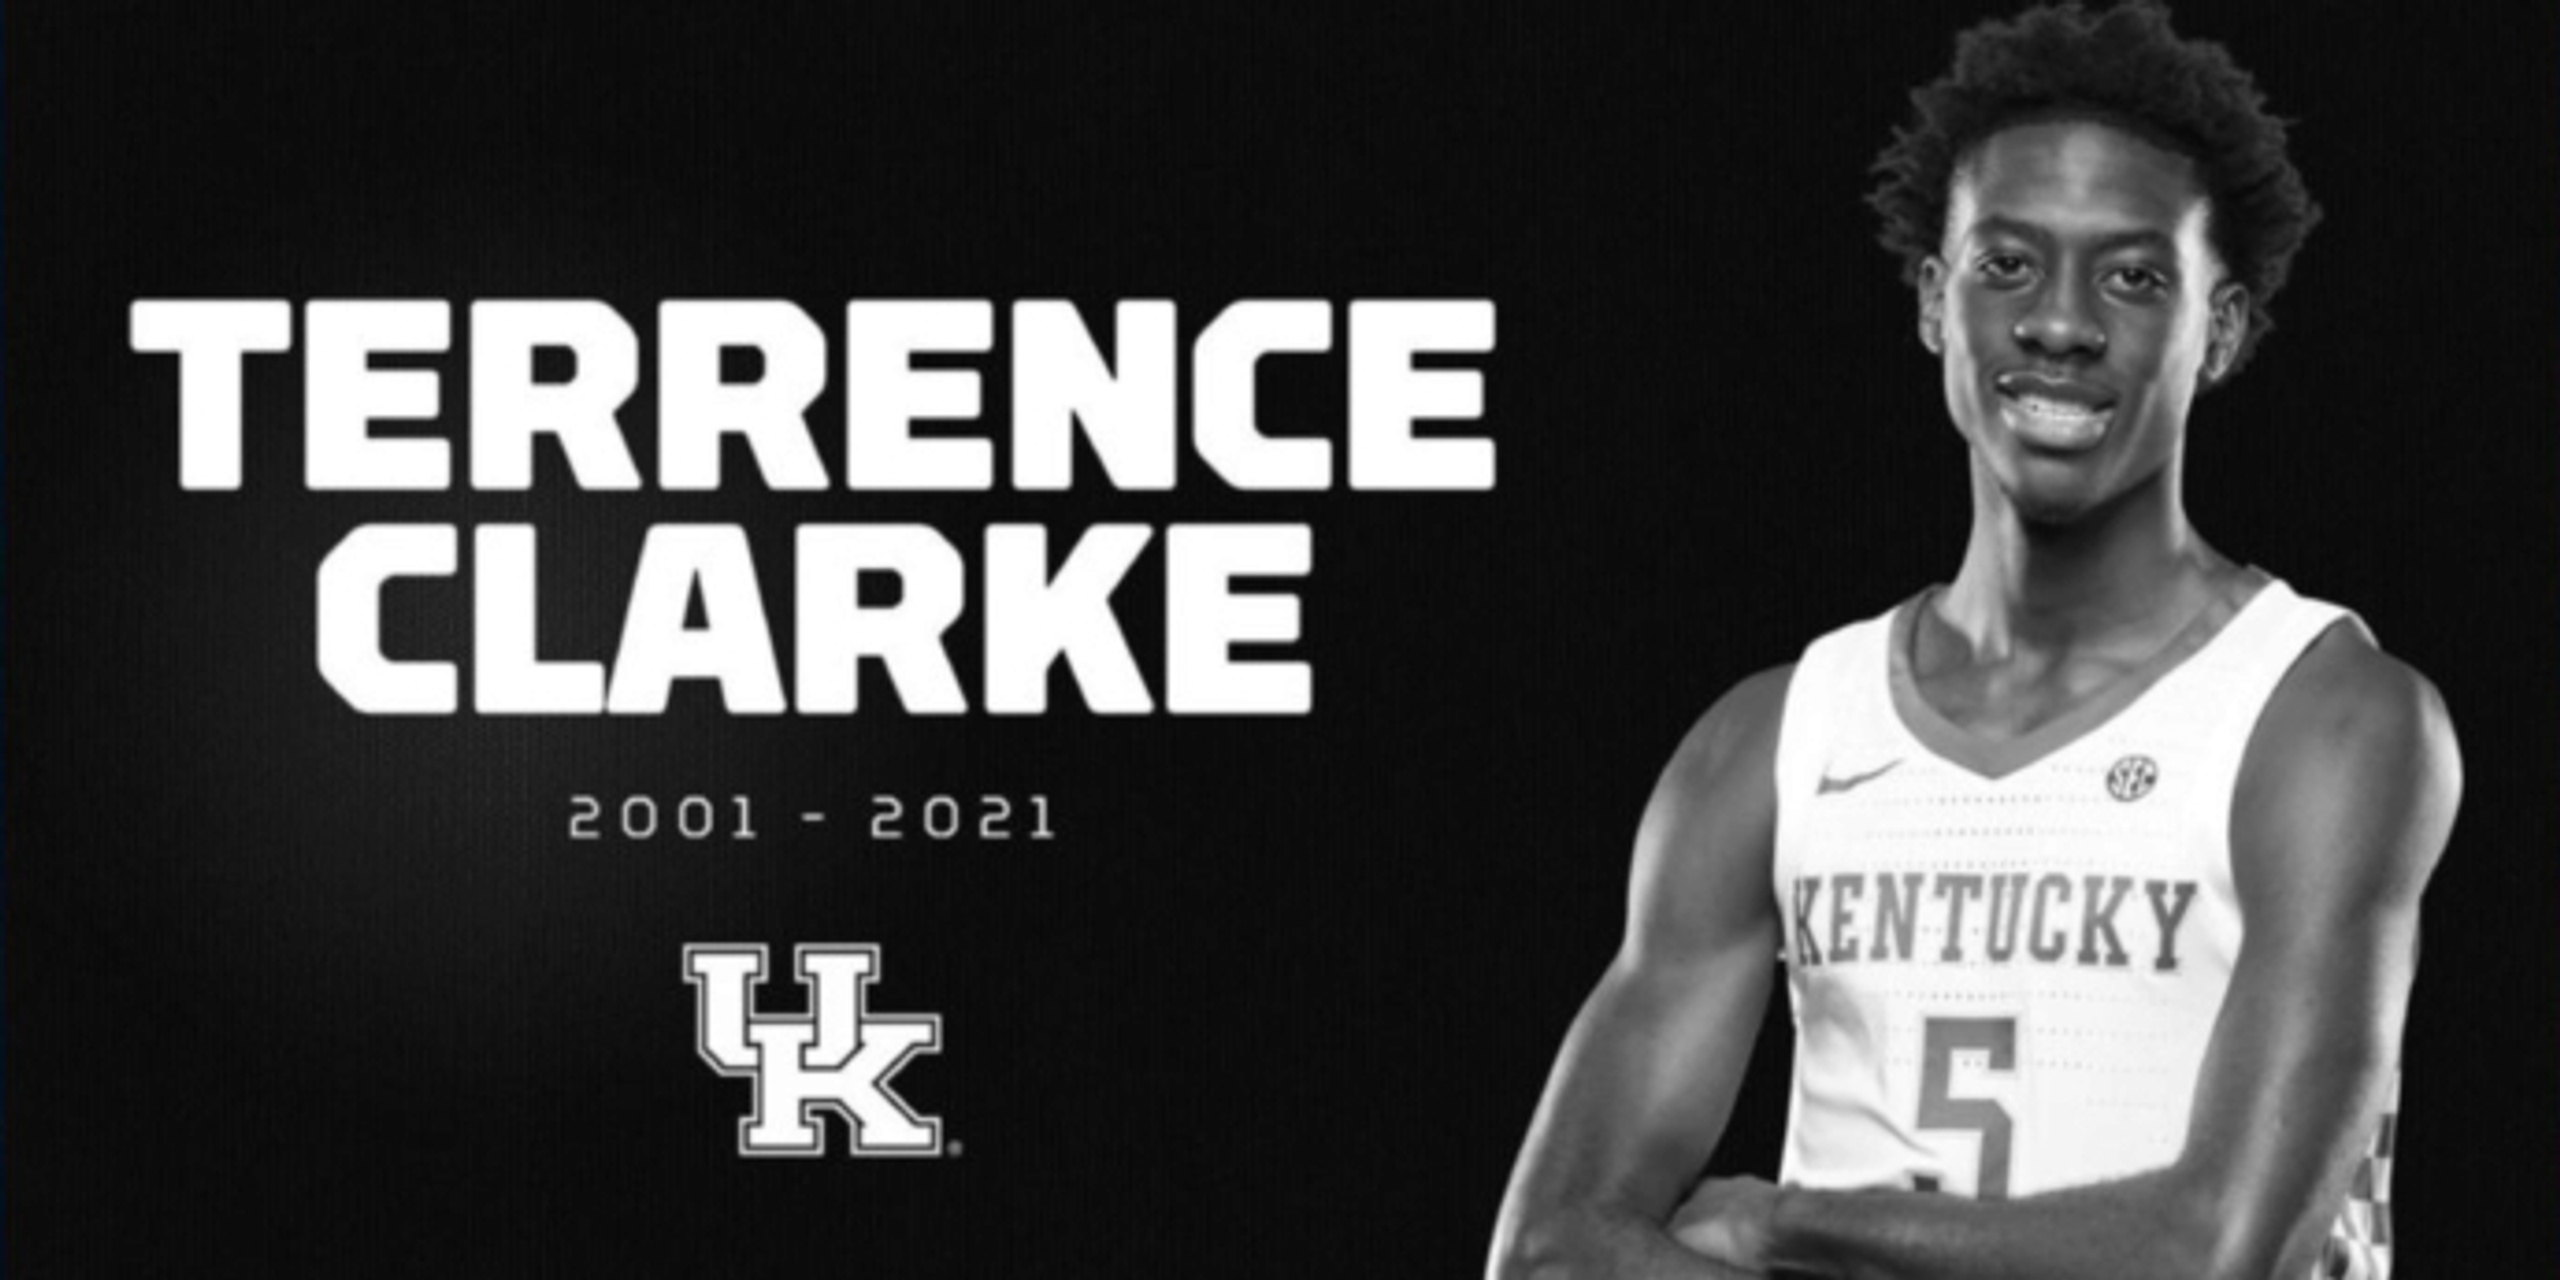 Basketball community mourns the tragic losses of Terrence Clarke, Dorian Pinson